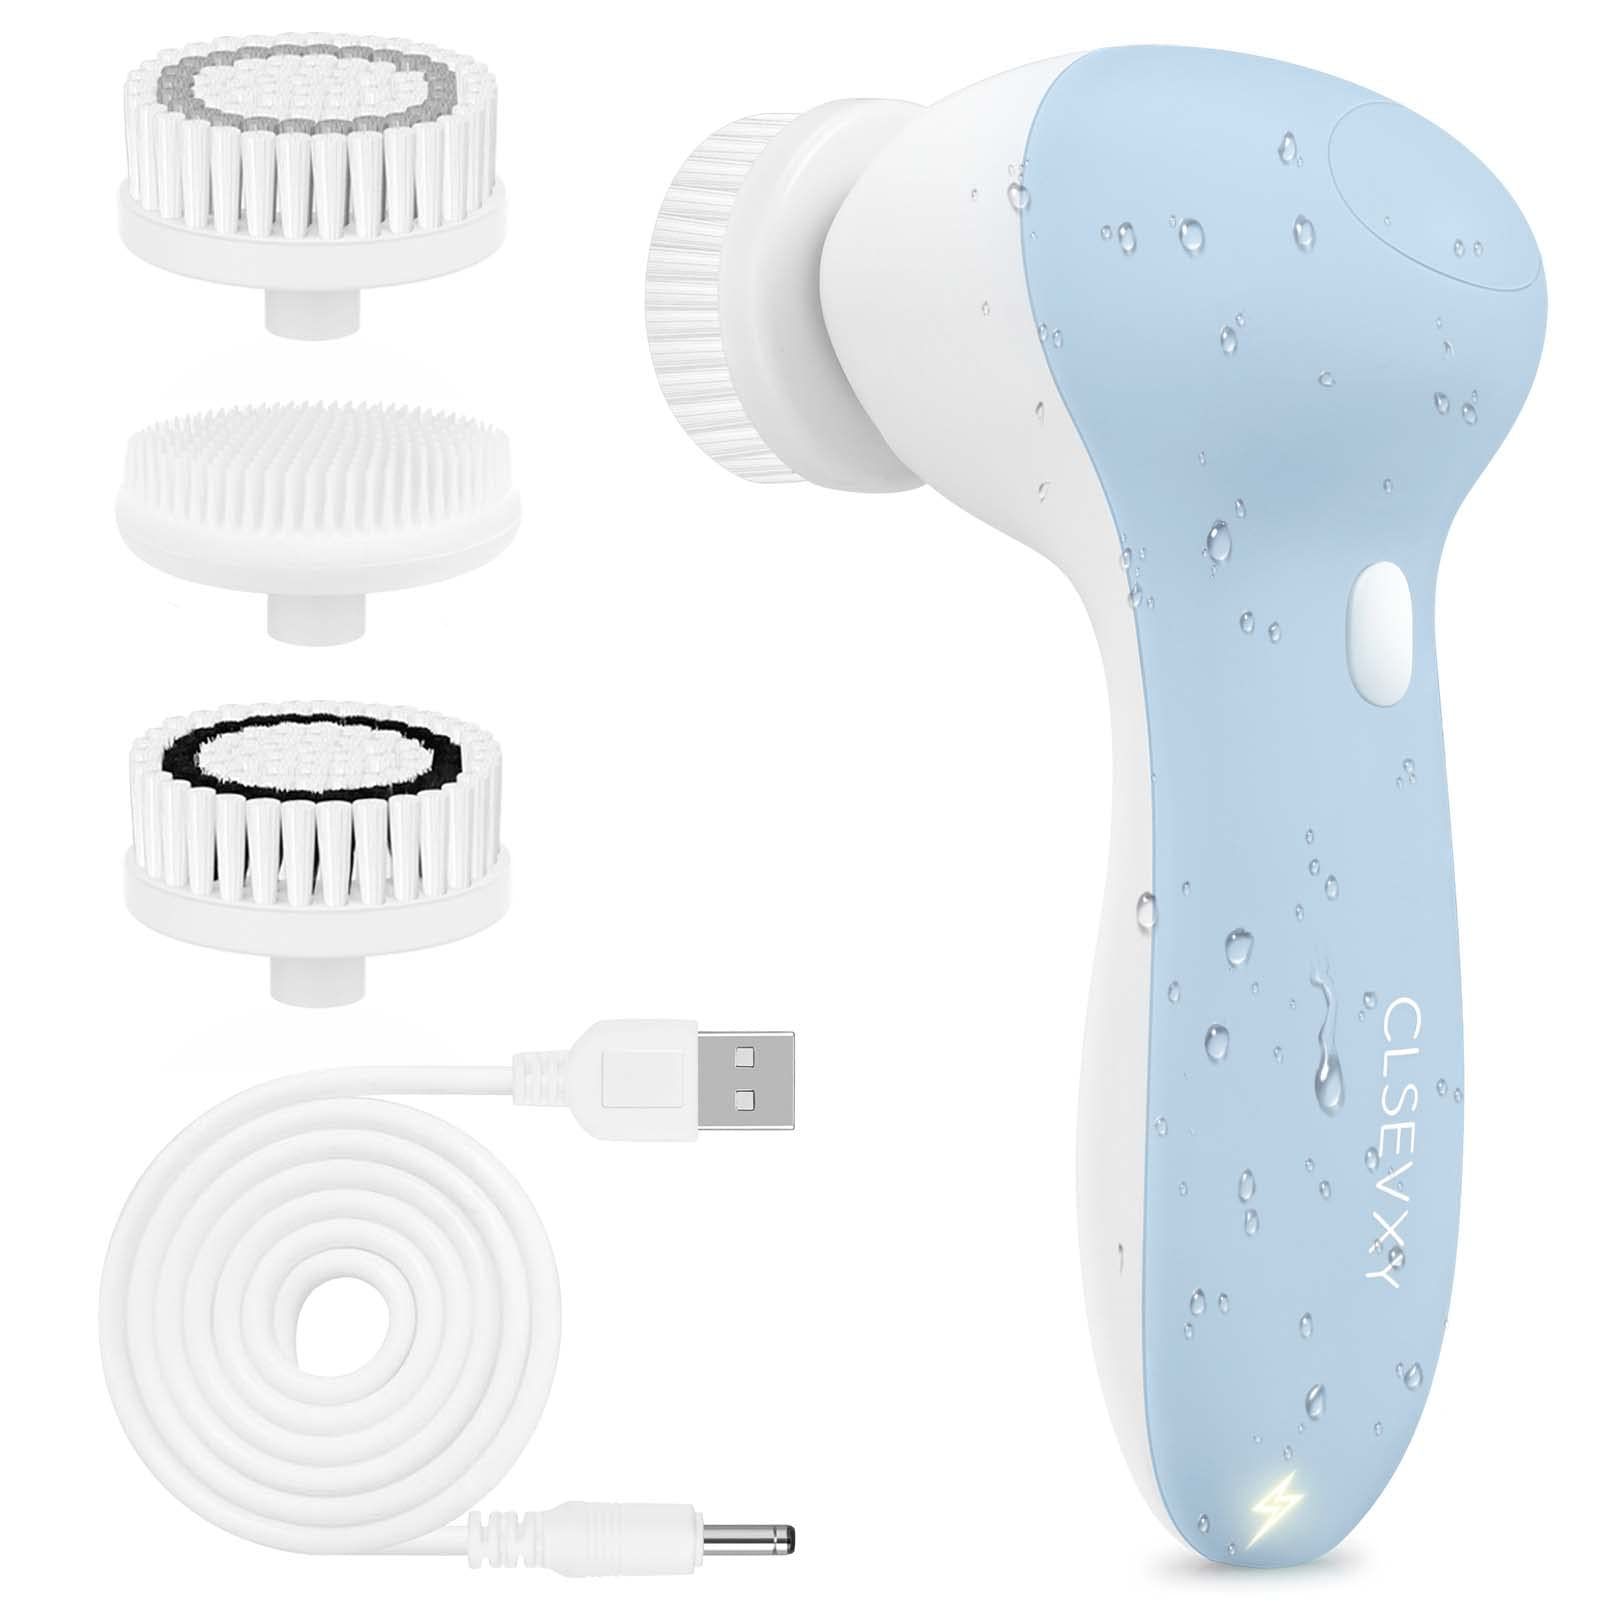 Rechargeable Facial Cleansing Spin Brush Set with 3 Exfoliating Brush Heads - Waterproof Face Scrubb | Amazon (US)